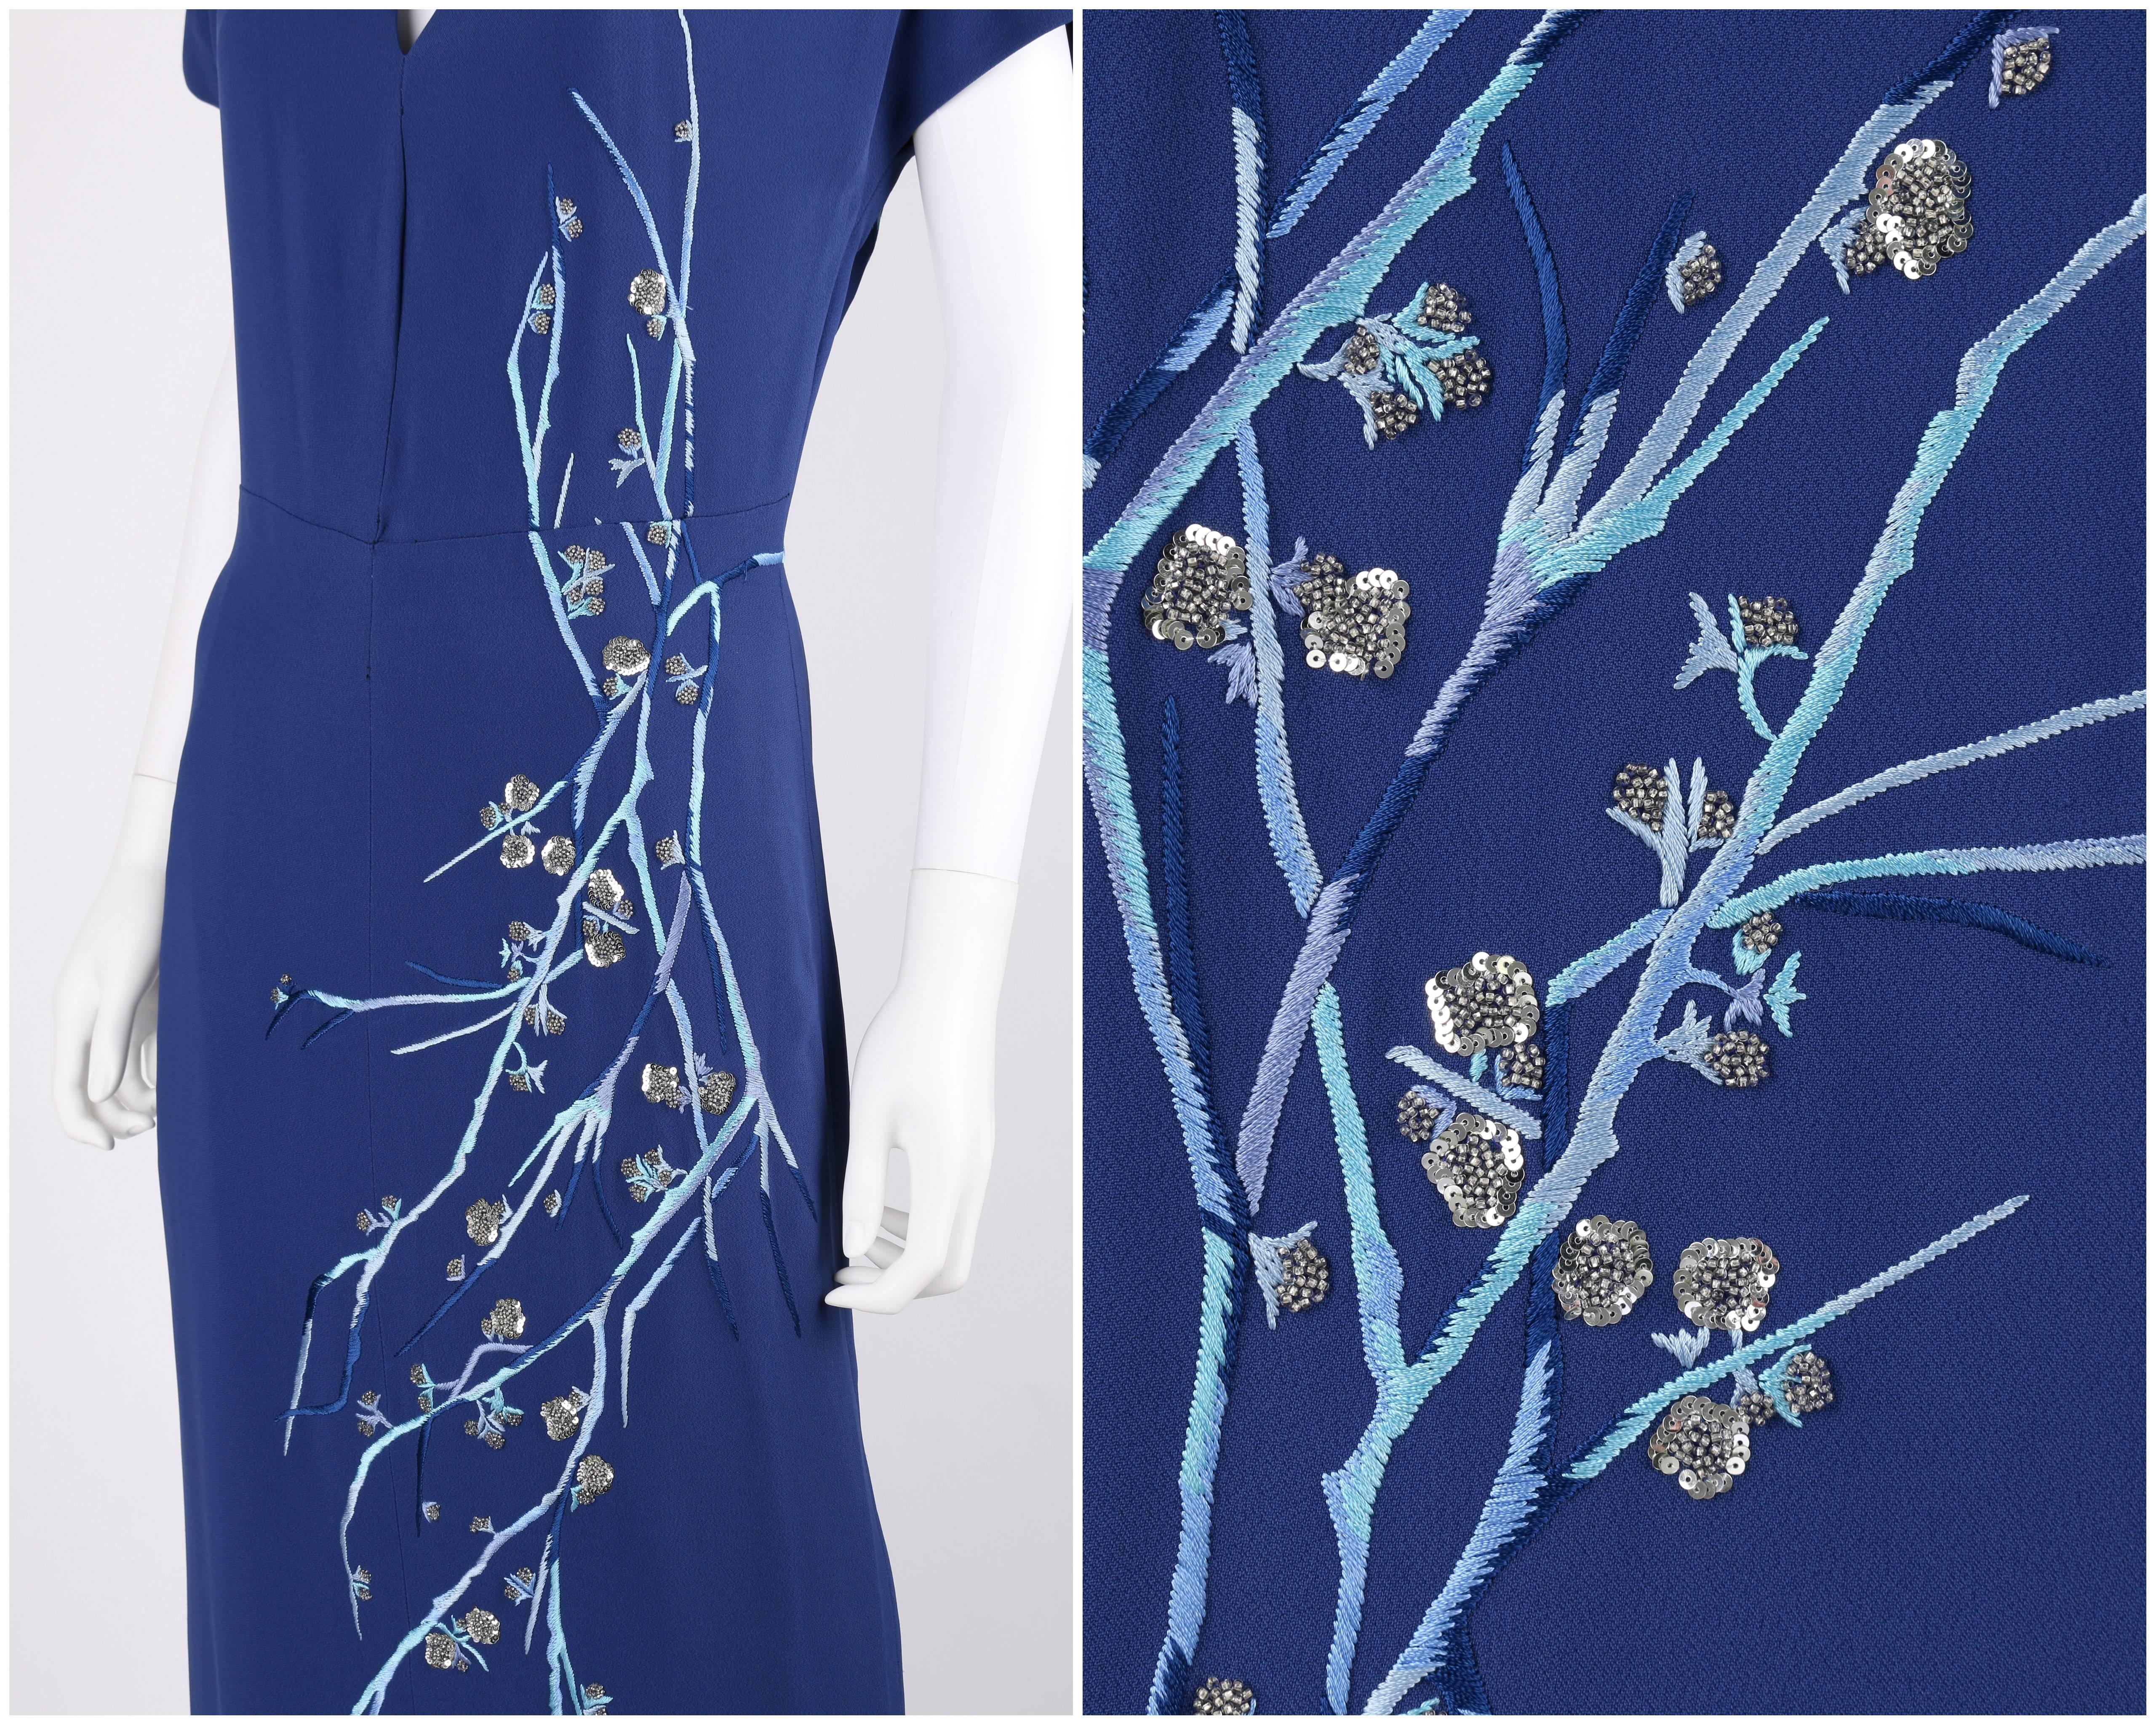 Women's GIVENCHY Couture A/W 1998 ALEXANDER McQUEEN Royal Blue Floral Embroidered Dress